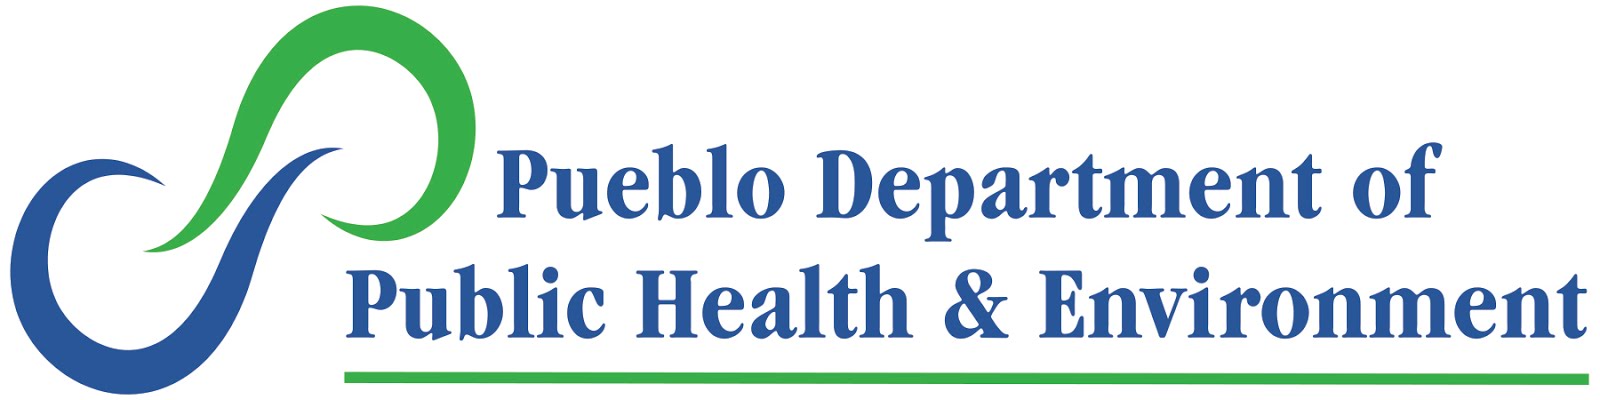 For a list of all of our services, go to pueblohealth.org or click our logo below